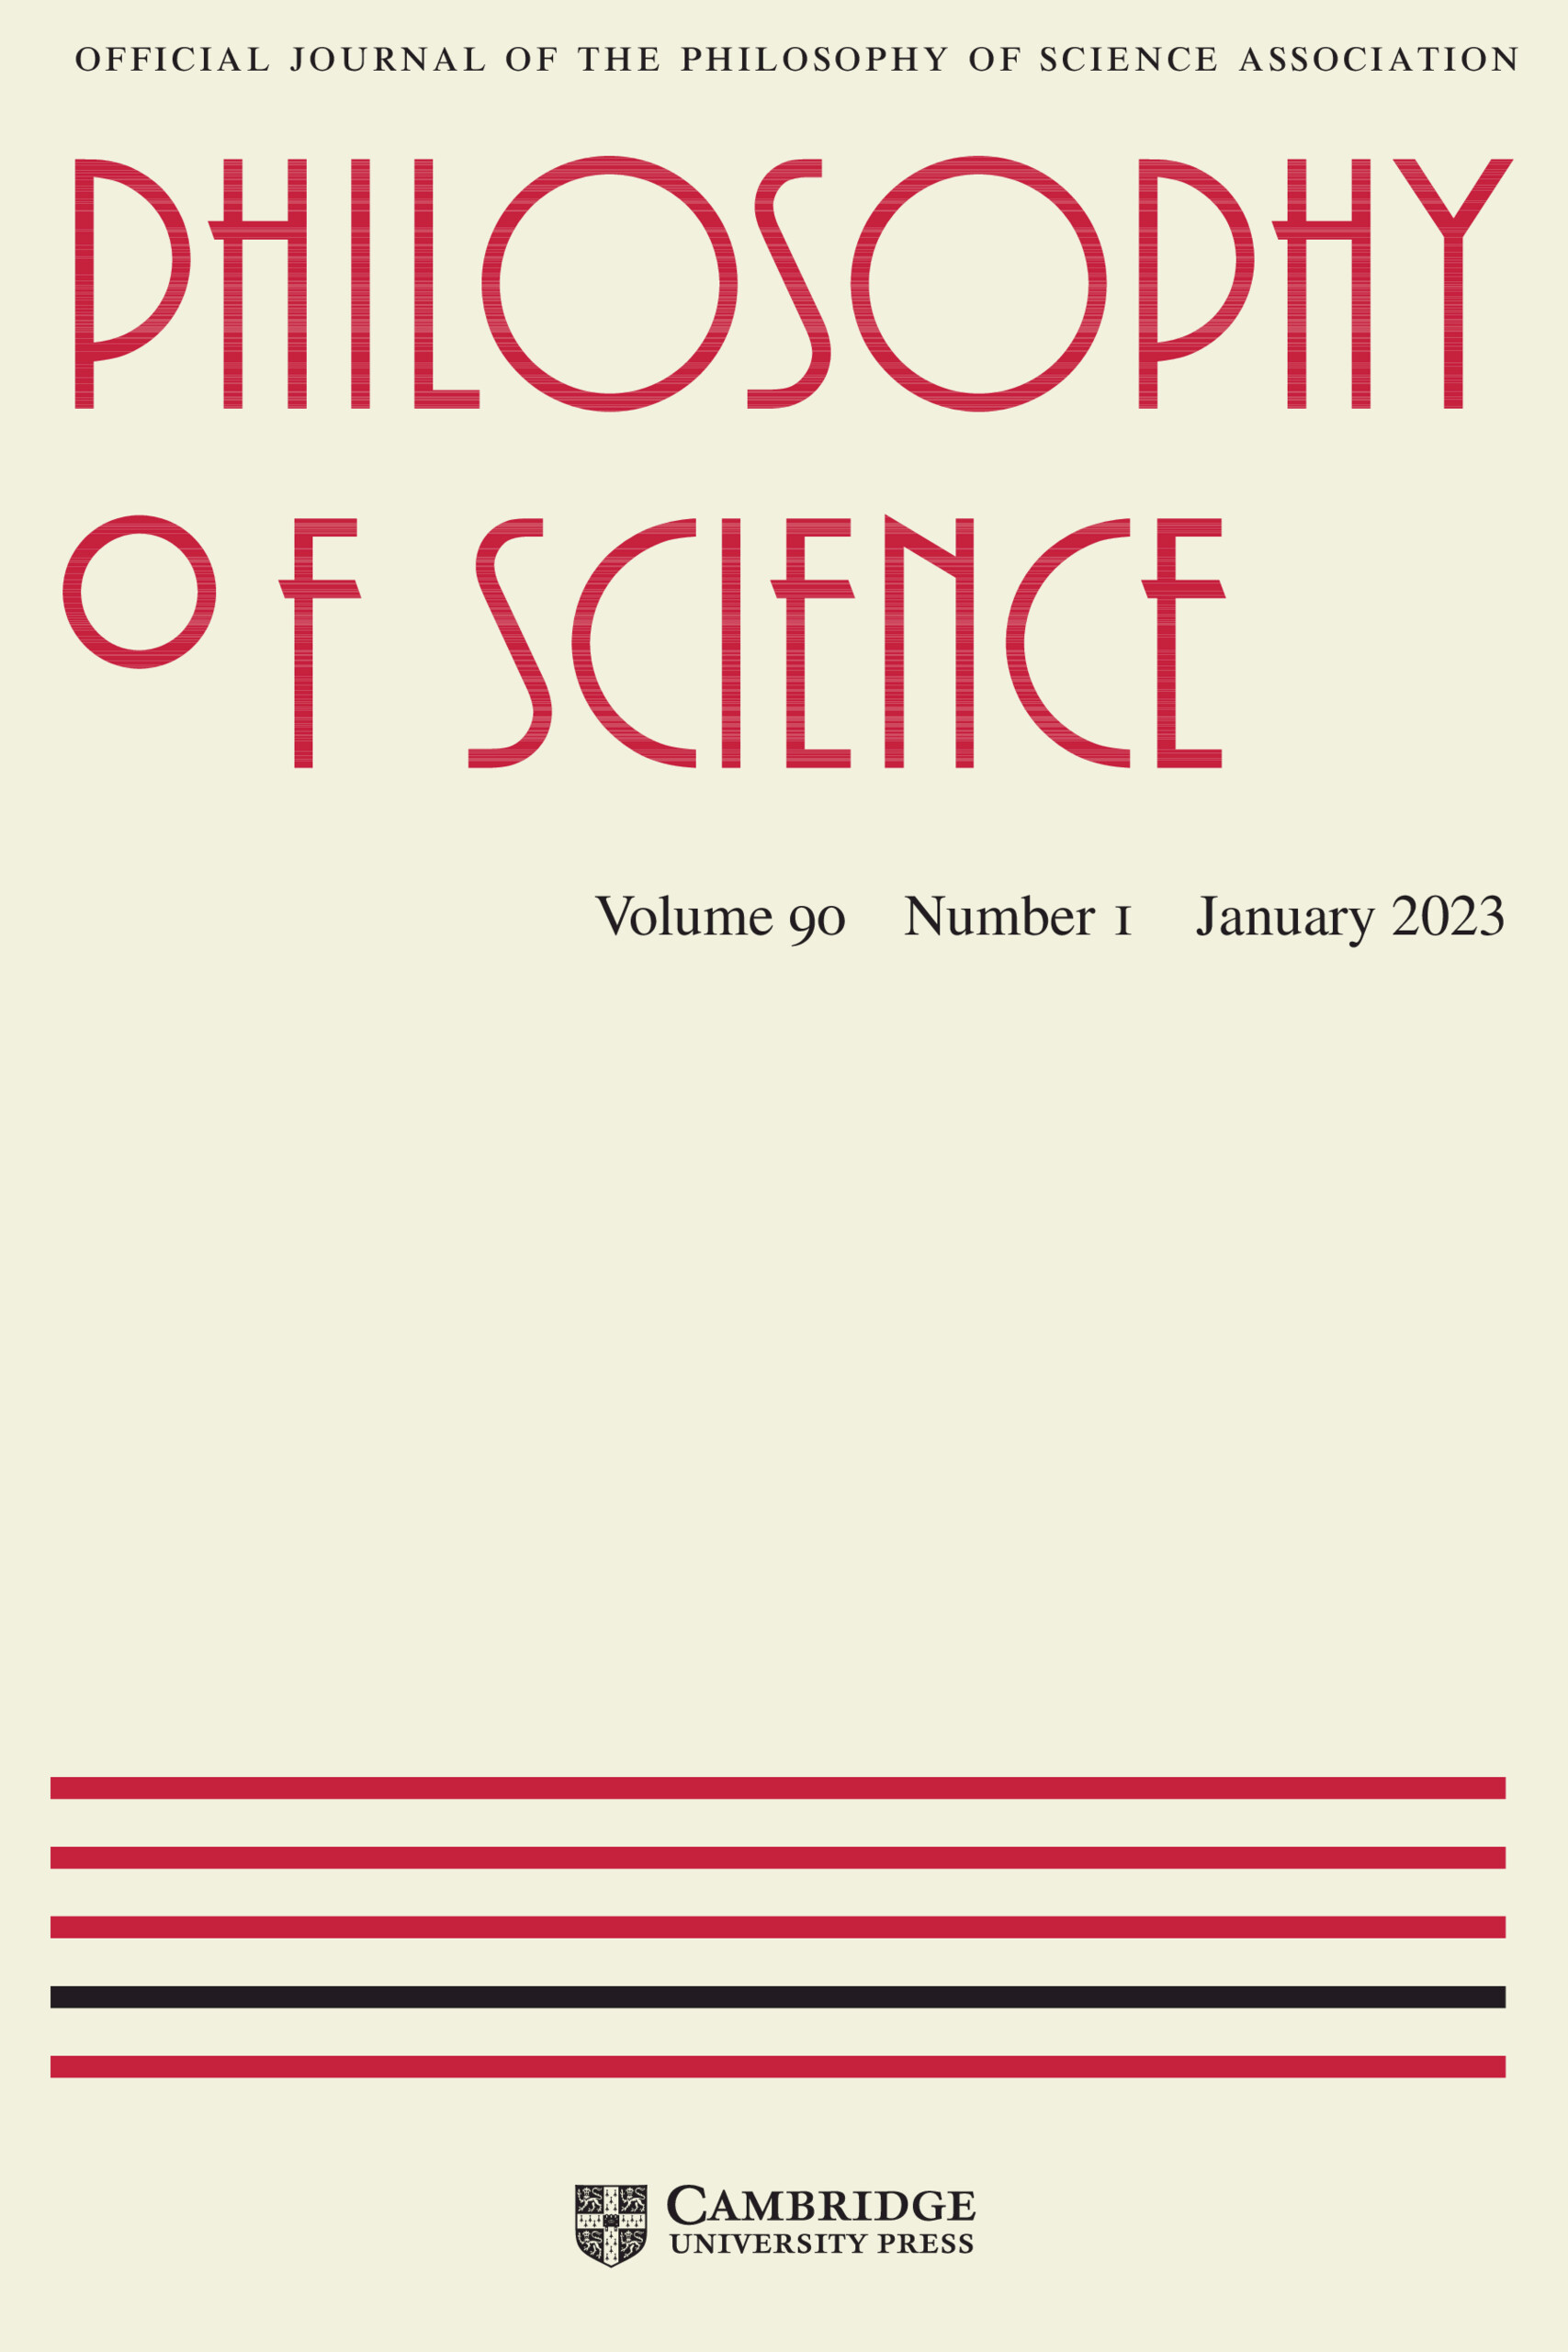 book review on philosophy of science